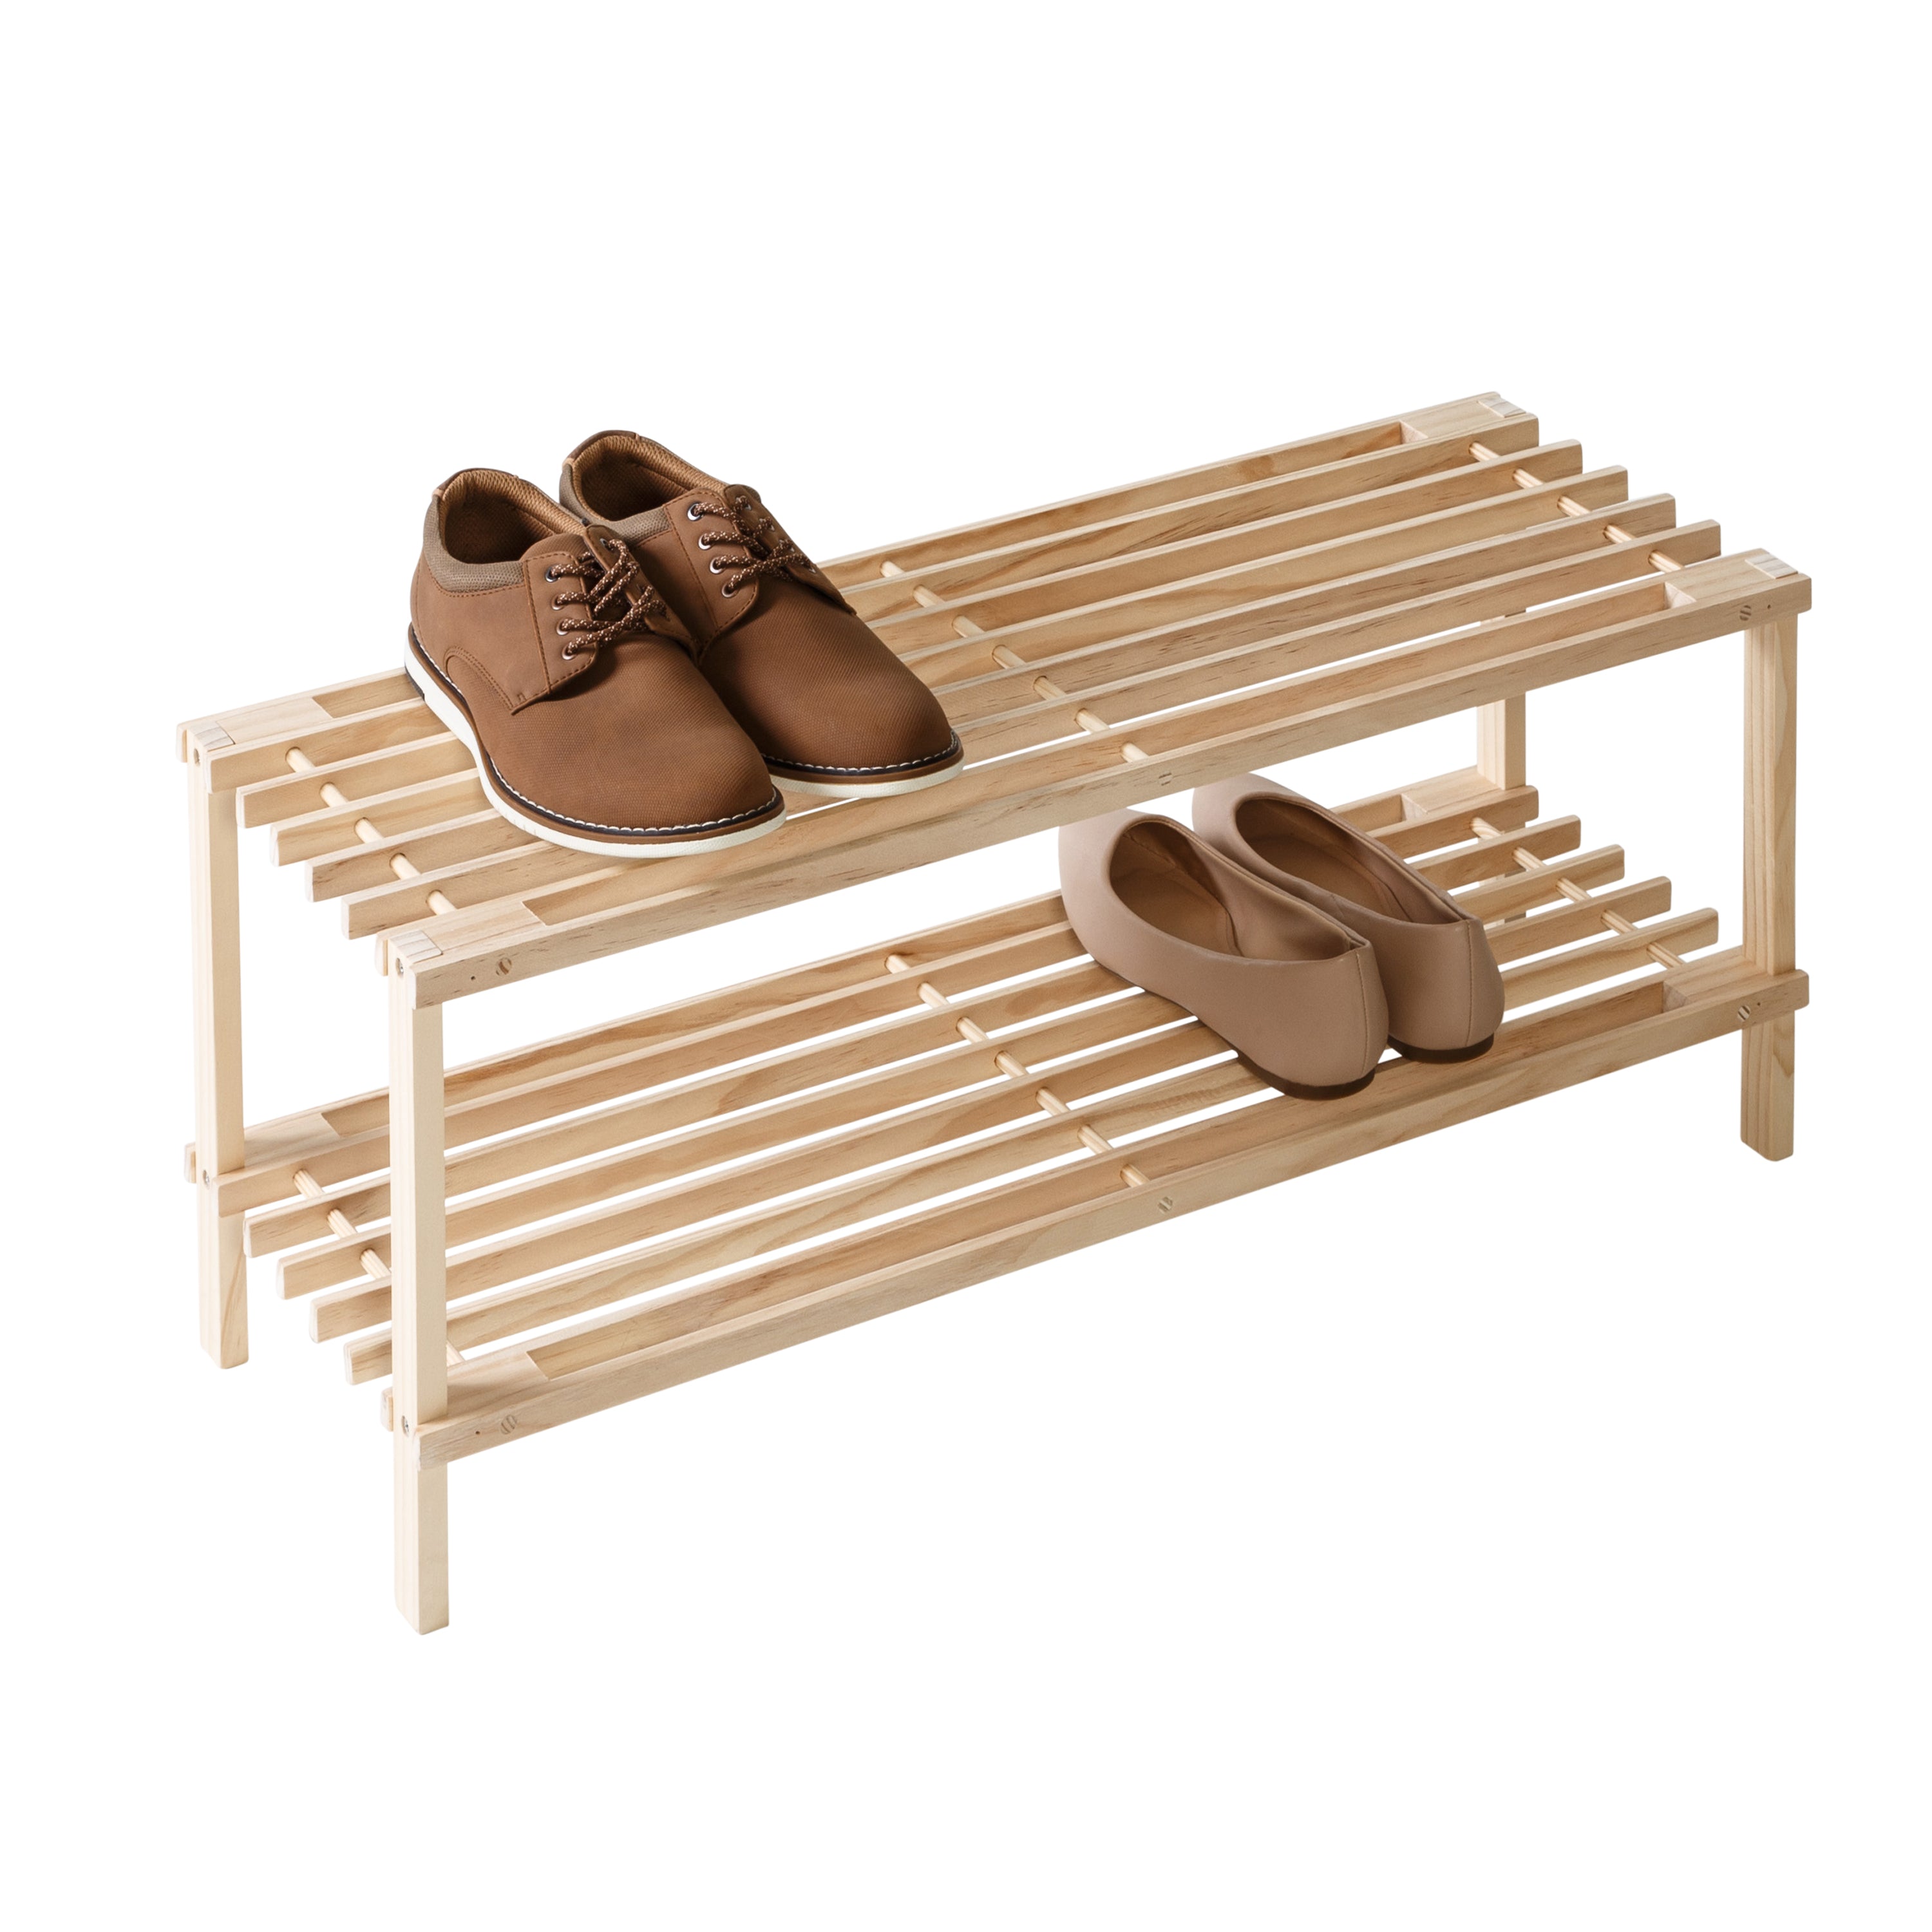 Shoe Shelves for Displaying Your Collection set of 6 Natural